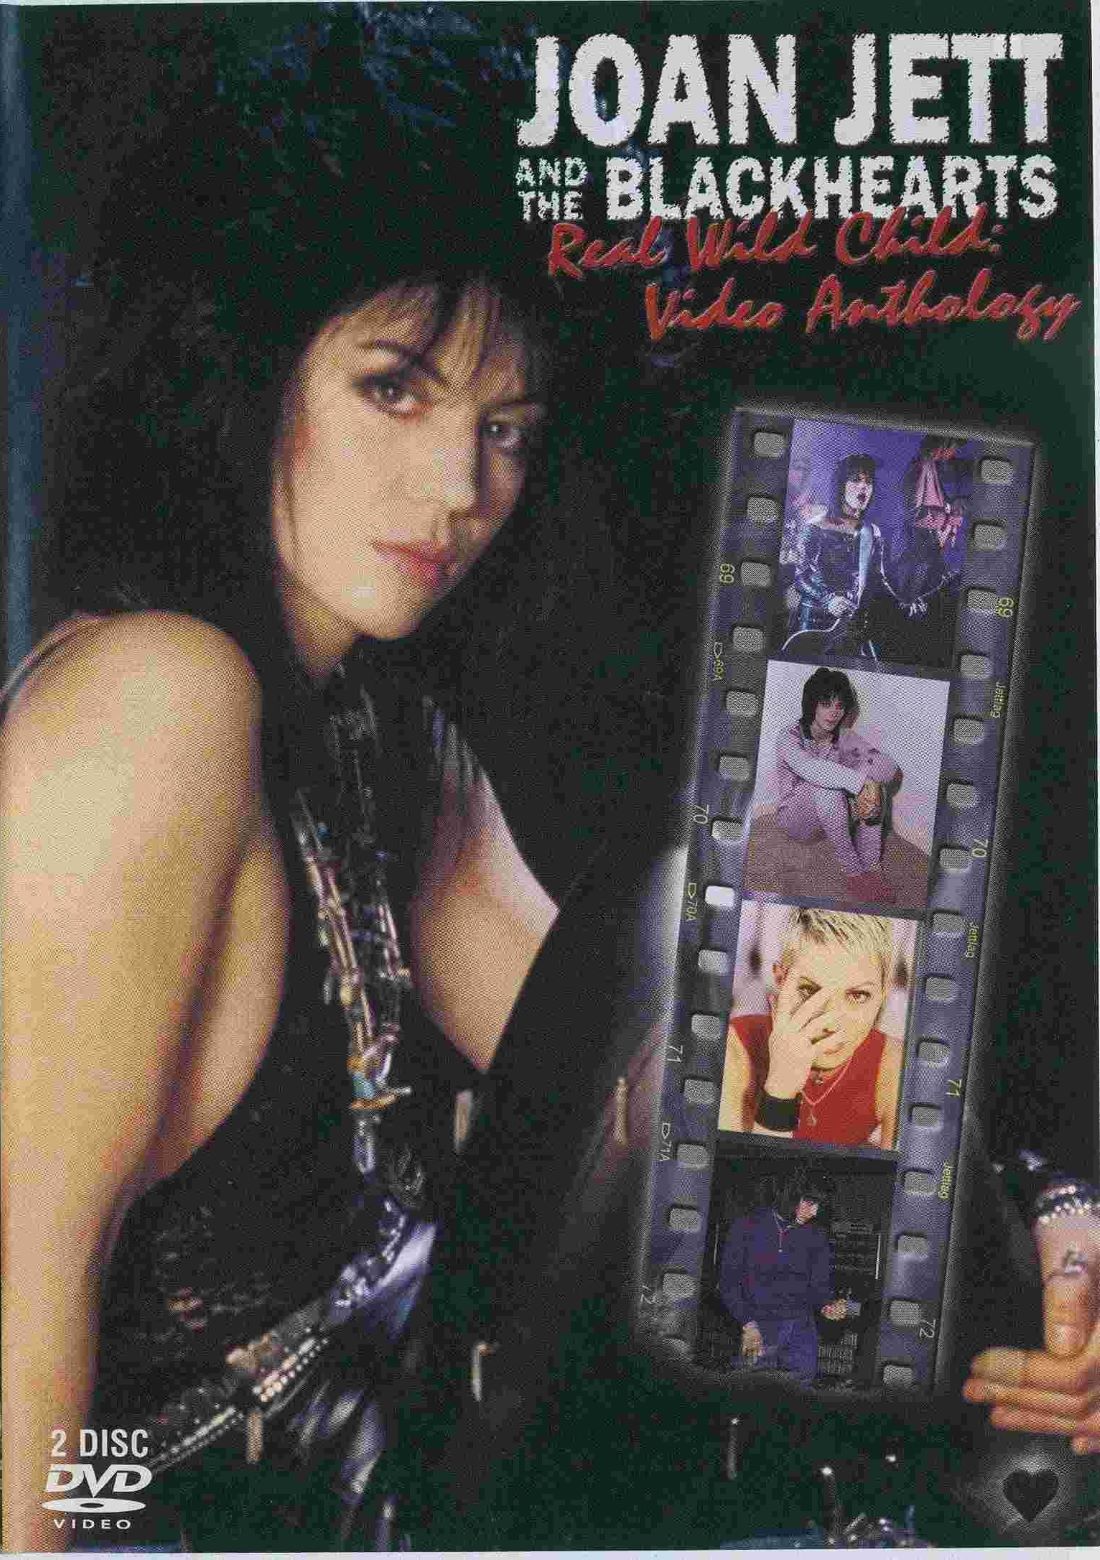 Joan Jett and the Blackhearts - Real Wild Child - Video Anthology (2003) (2x DVD9)